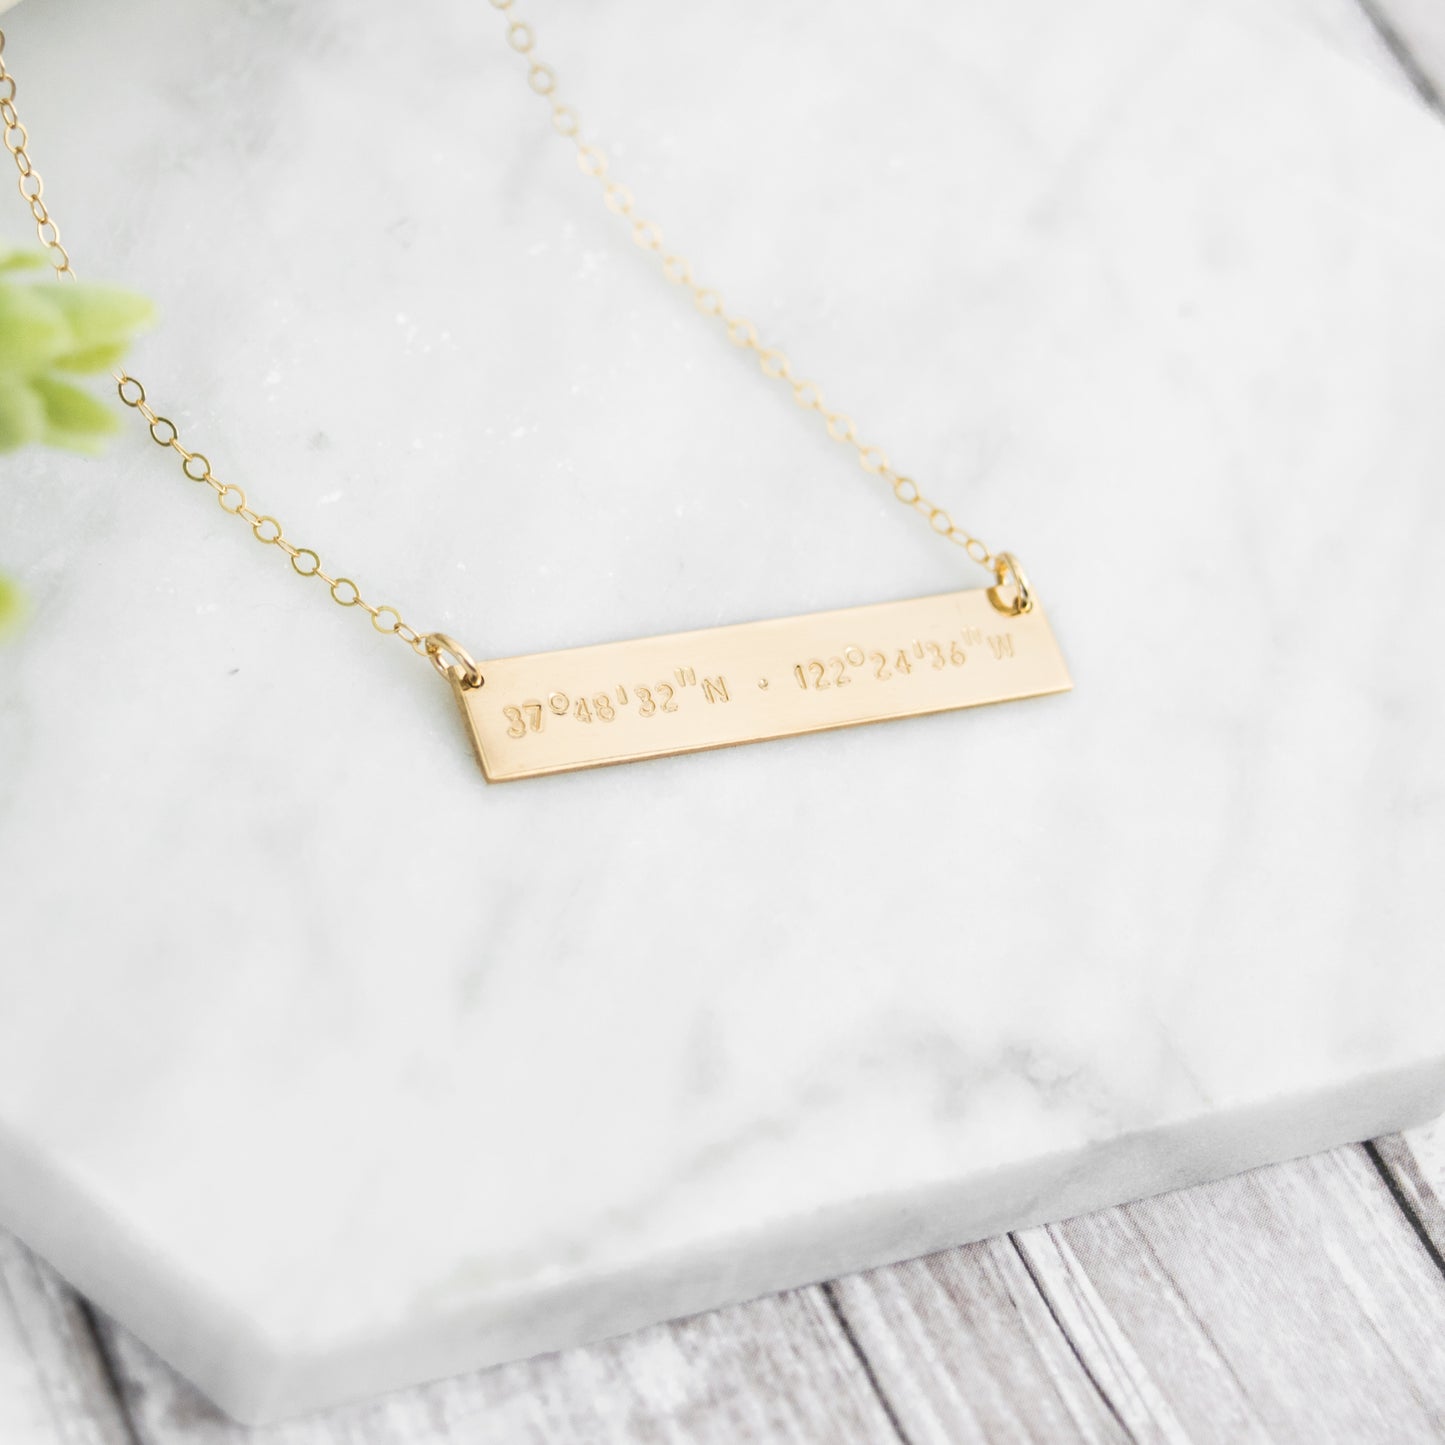 Hand stamped coordinates on a gold filled bar